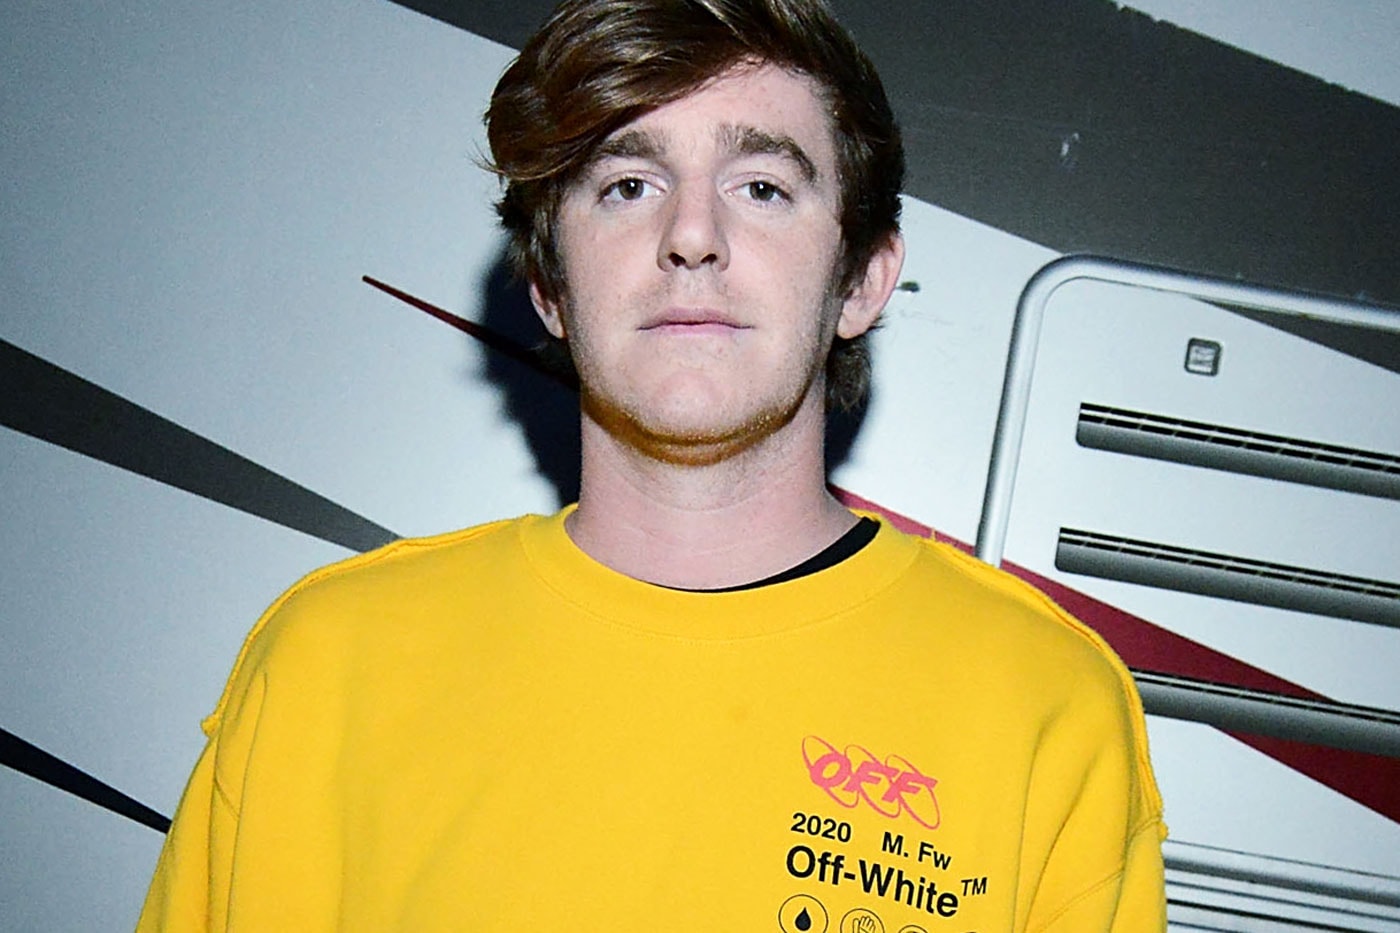 NGHTMRE Plays Jack Ü, Dillon Francis, RL Grime & More in Latest 'Diplo & Friends' Mix